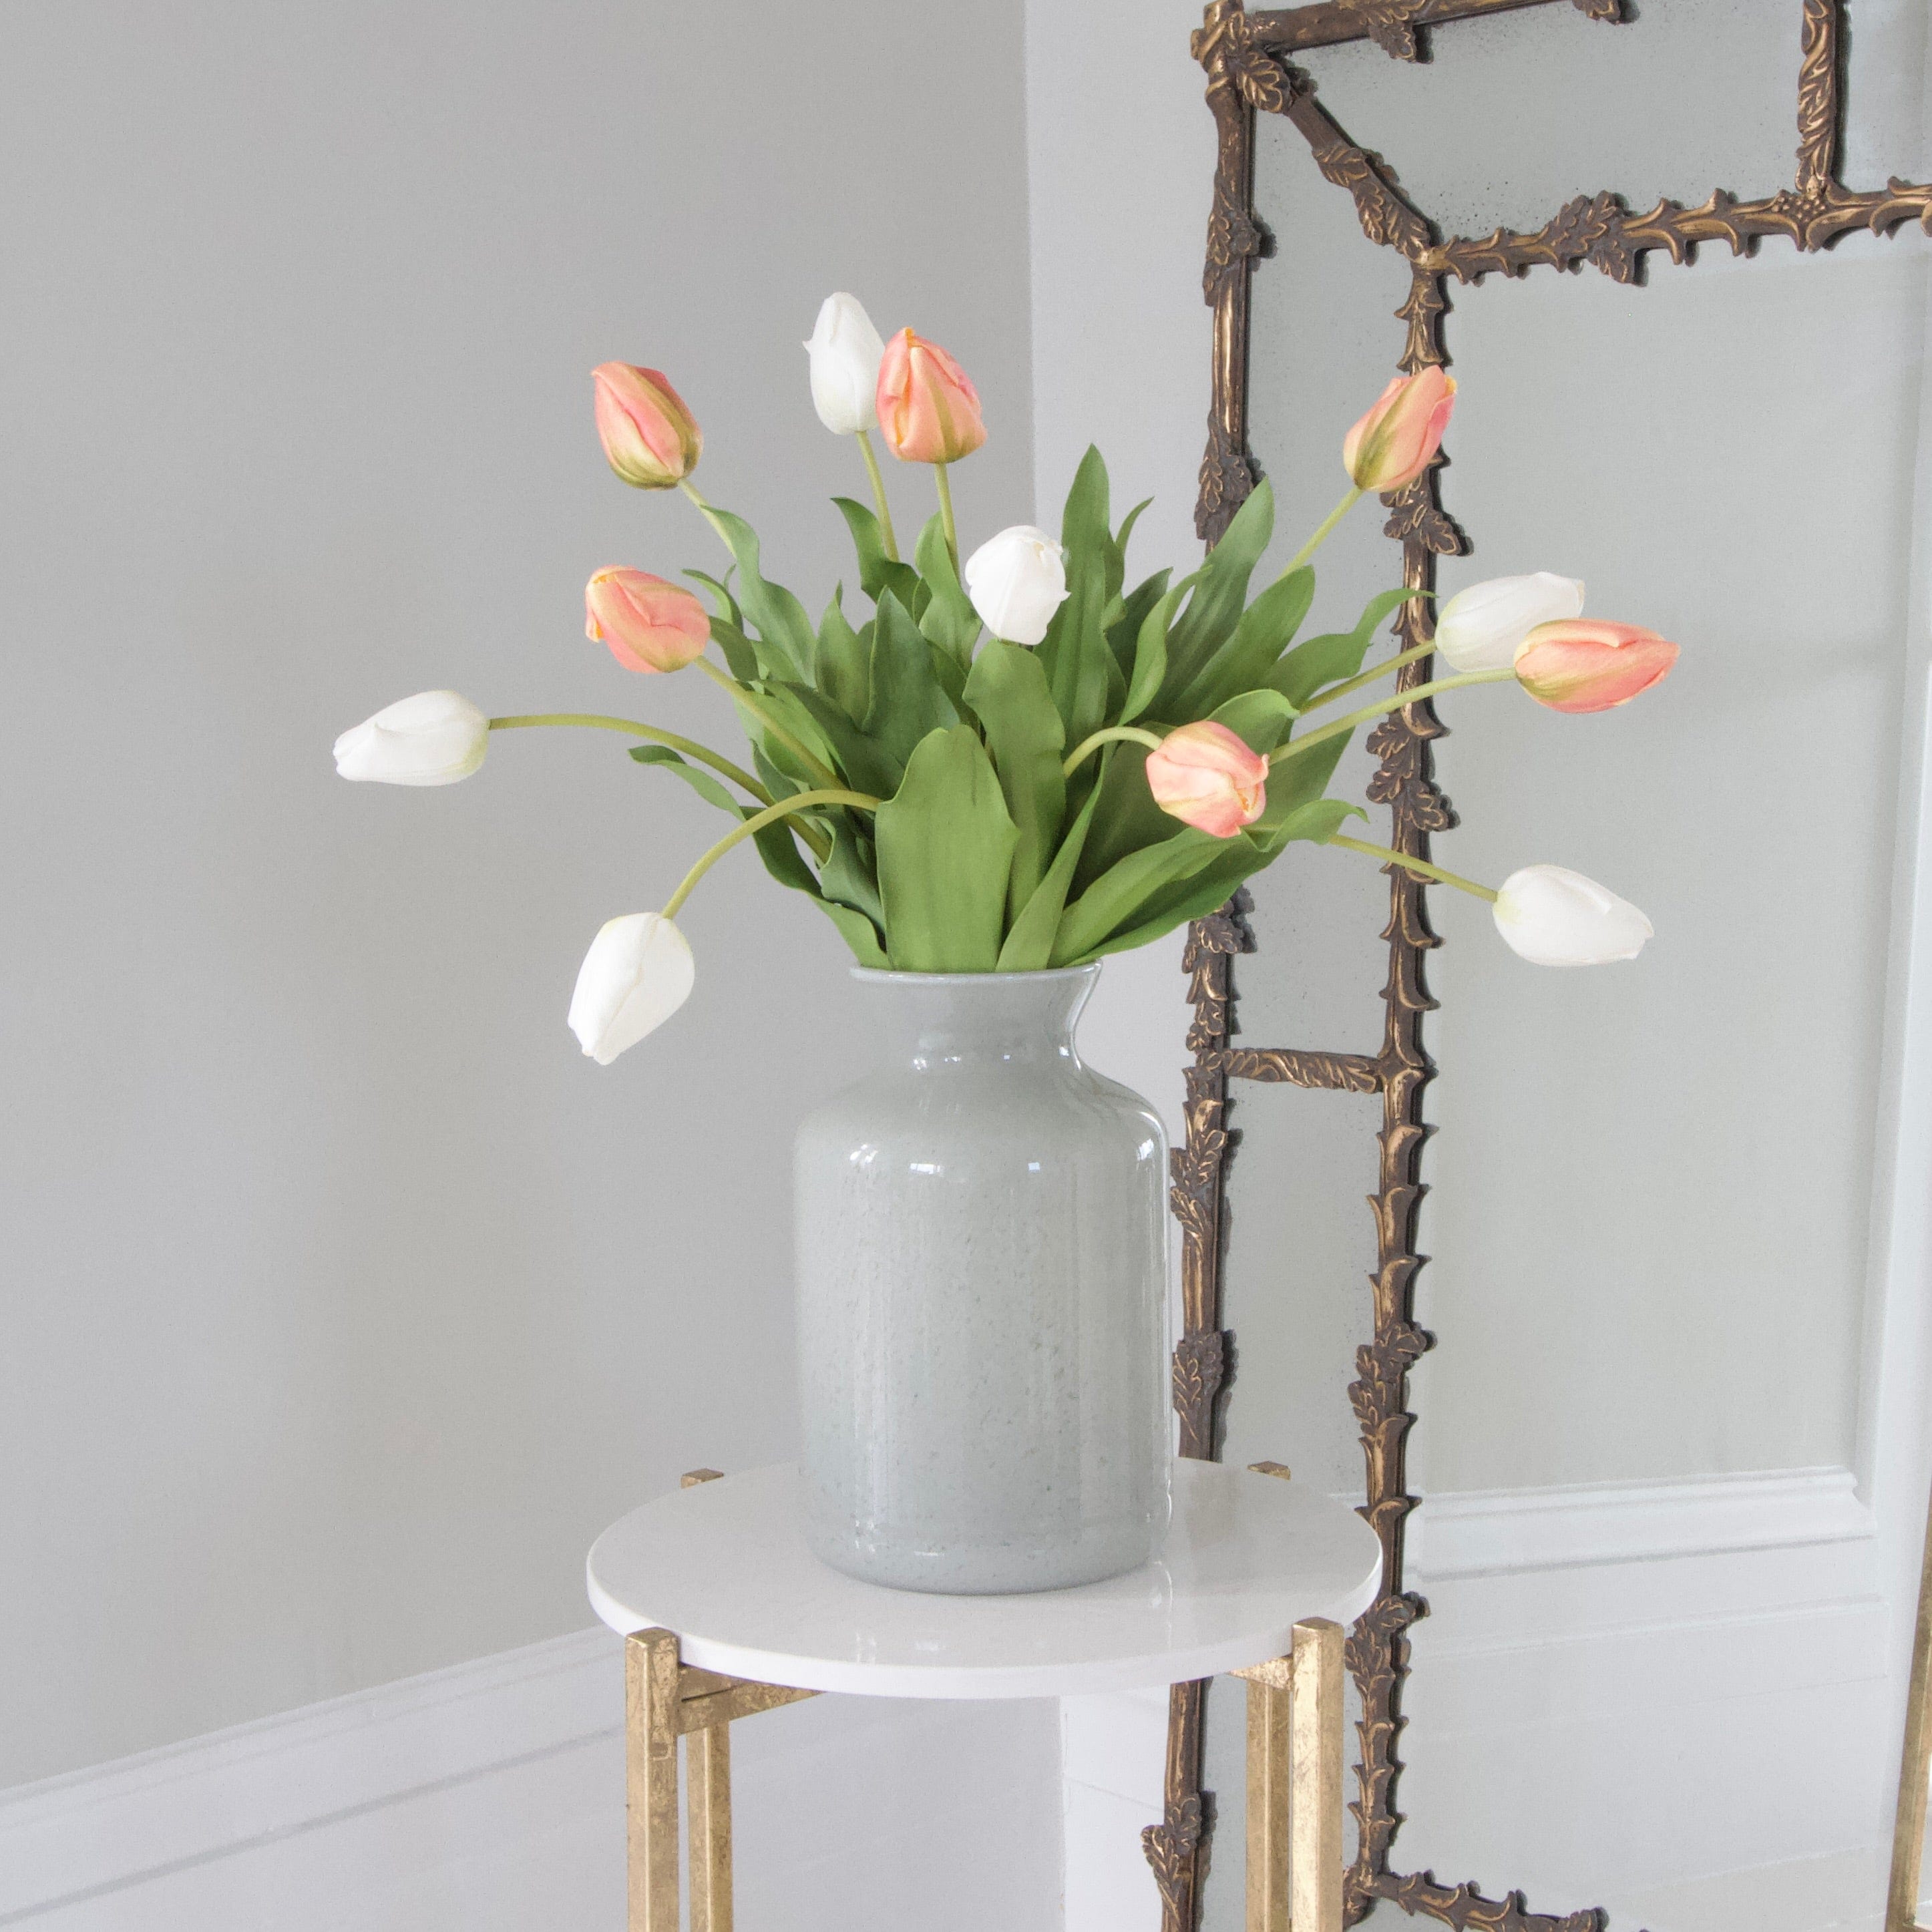 Luxury Lifelike Realistic Artificial Fabric Silk Blooms with Foliage Buy Online from The Faux Flower Company | 12 stems Tulip Bouquet styled in Glass Funnel Neck Vase